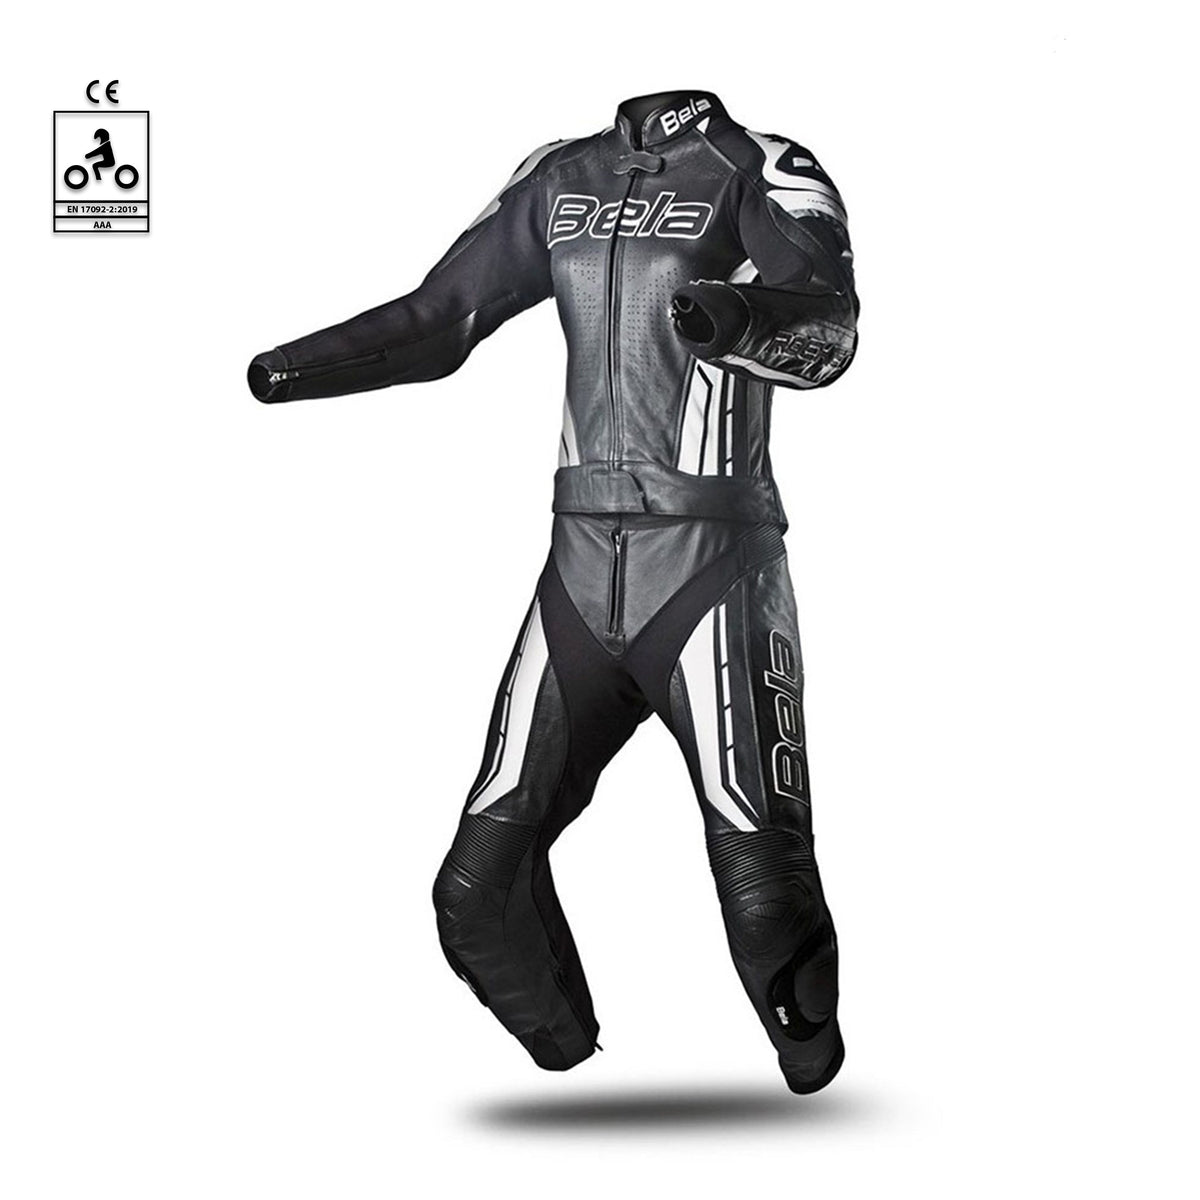 Bela Rocket Lady black and white 2 PC Motorcycle Racing Suit front side view